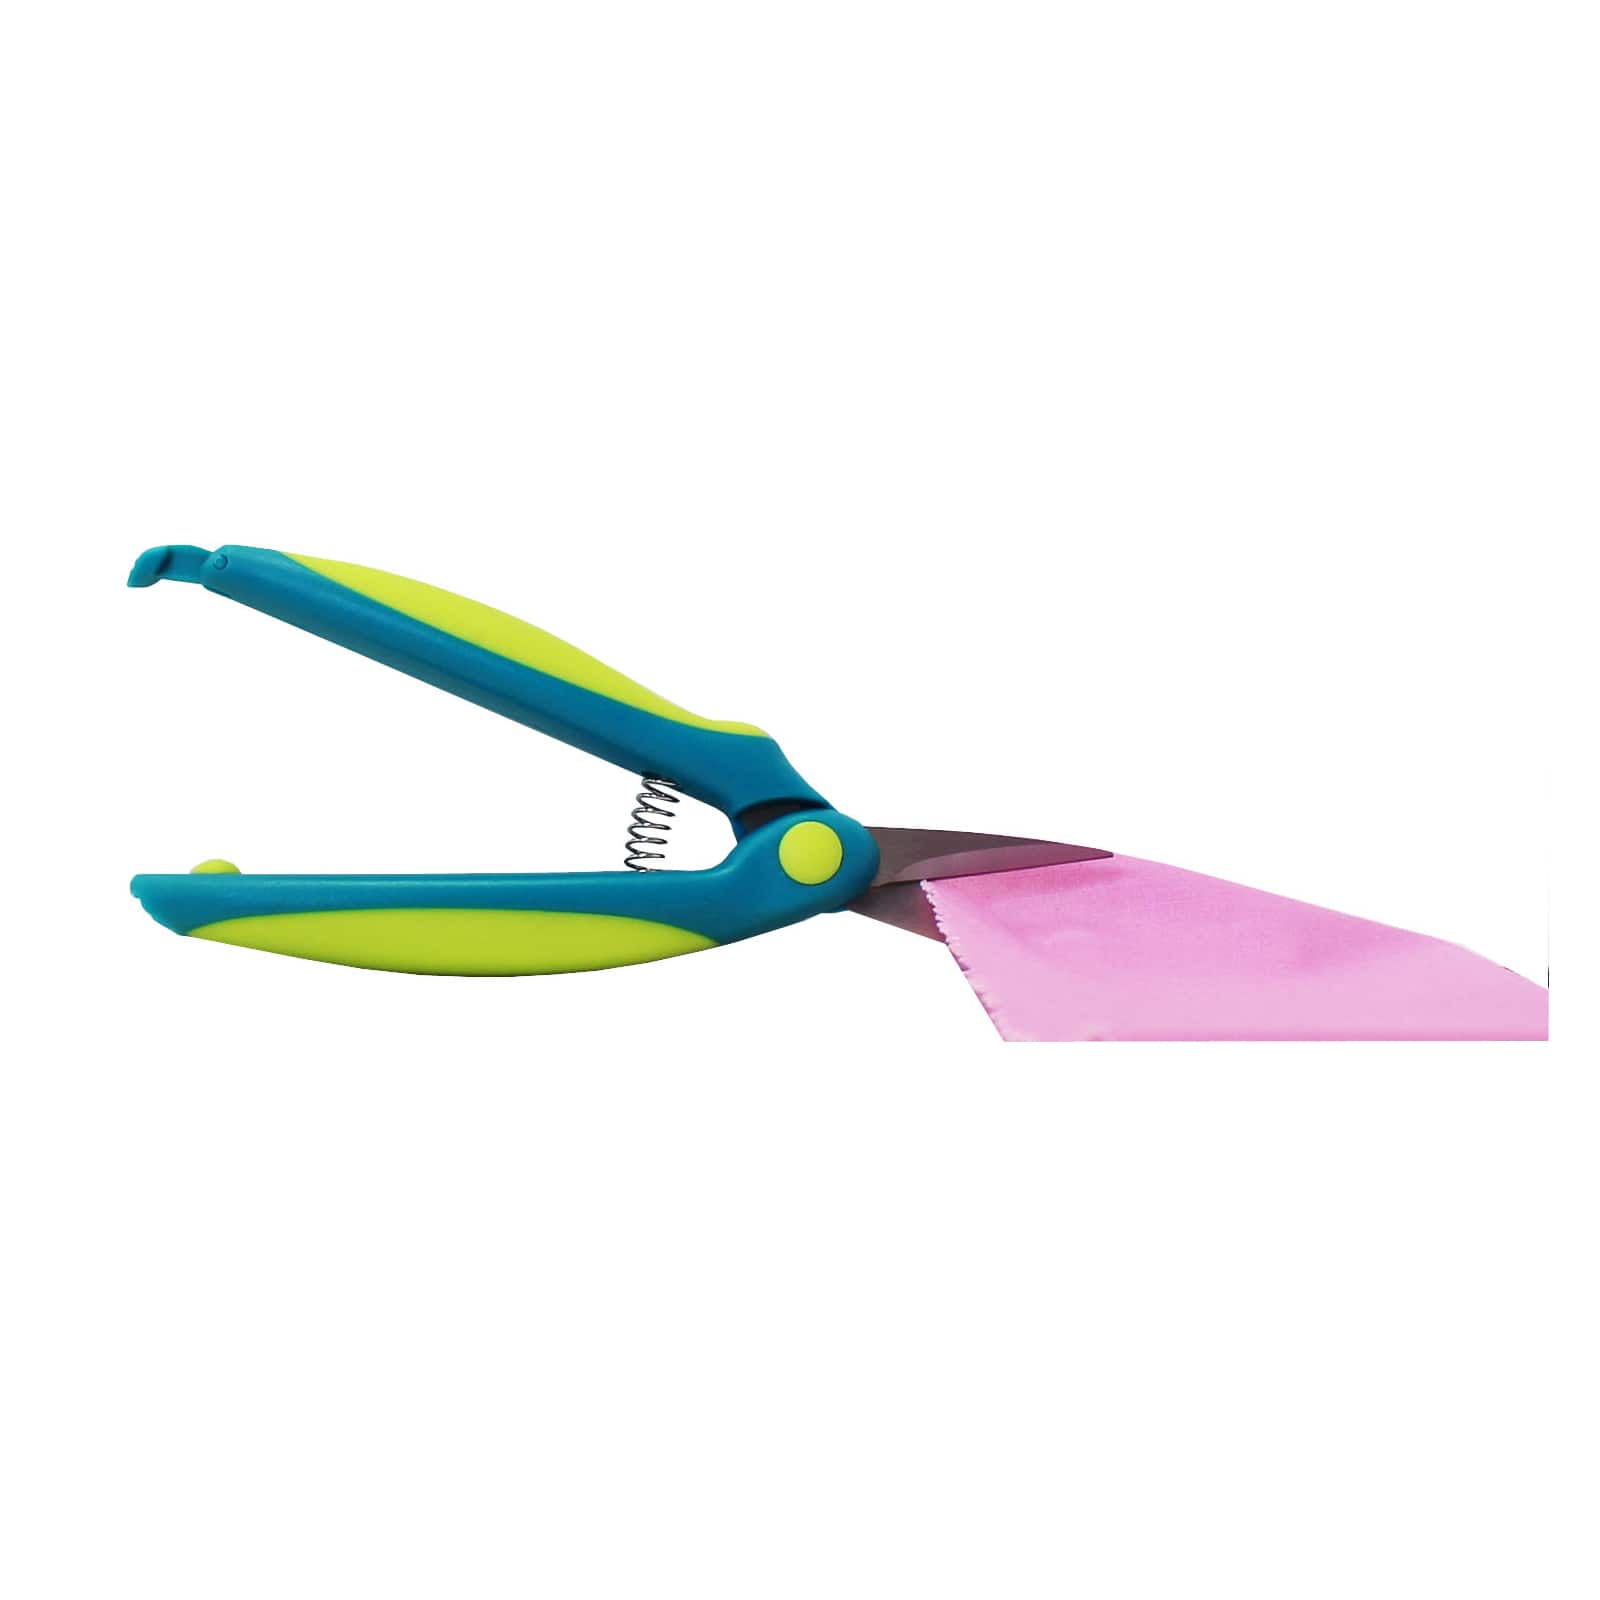 6 Pack: 6.5&#x22; Ultra-Sharp Spring Tension Scissors by Loops &#x26; Threads&#x2122;